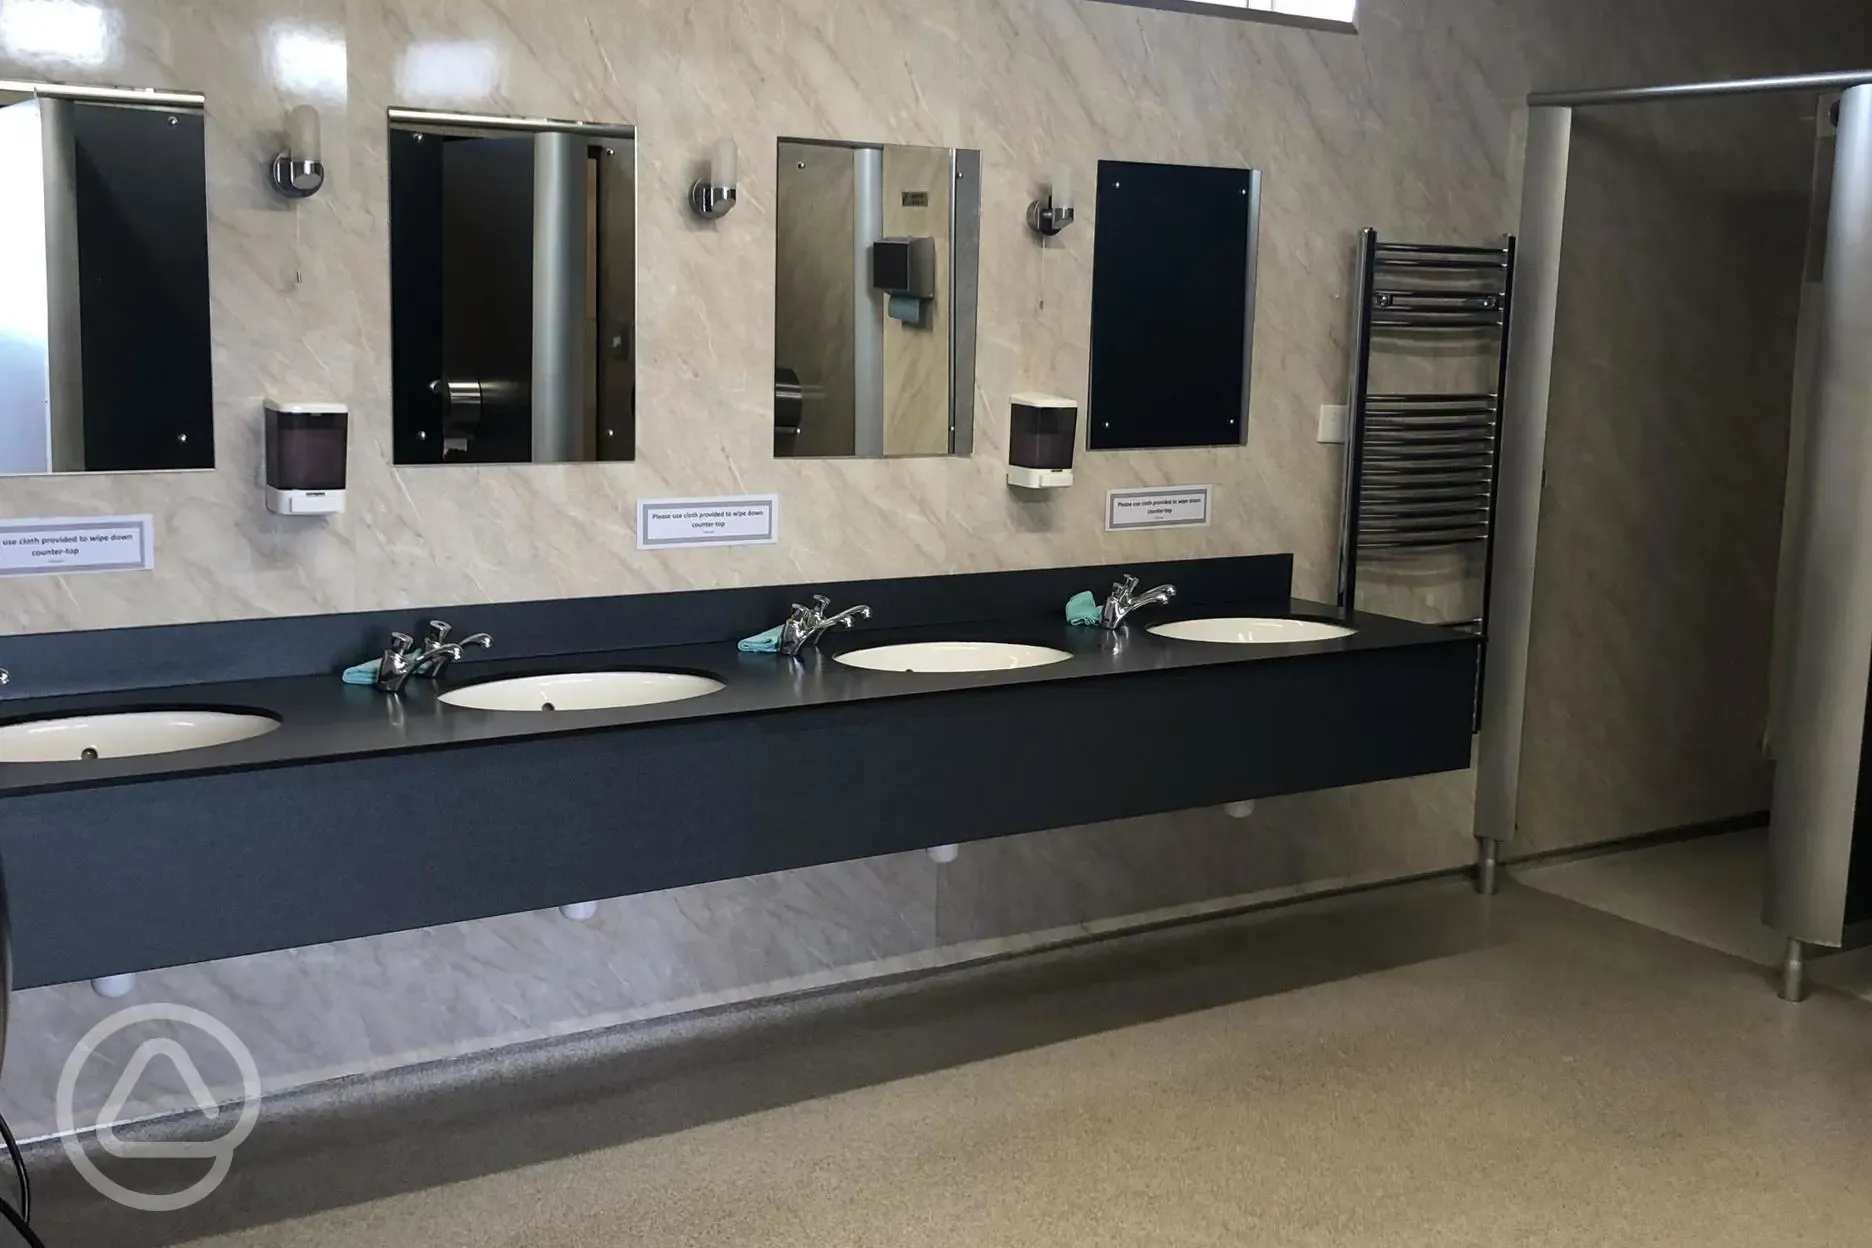 Clean, warm and modern toilet facilities with free hair dryers